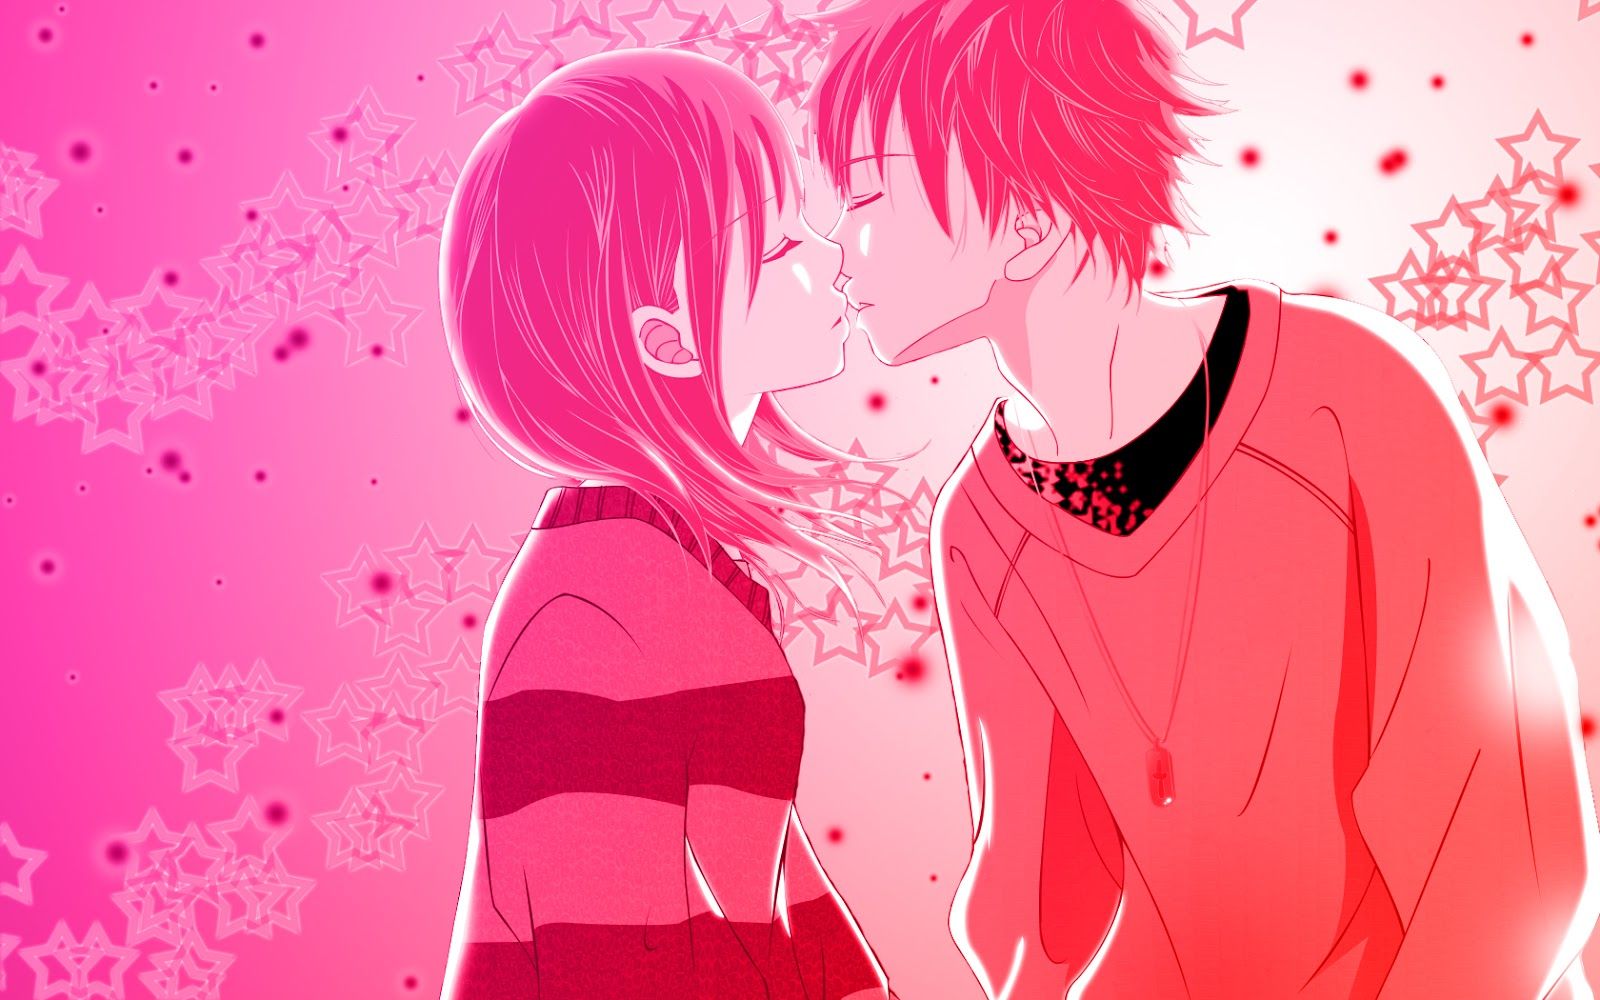 anime passionate kisses wallpapers wallpaper cave on sweet kissing and hugging anime wallpapers